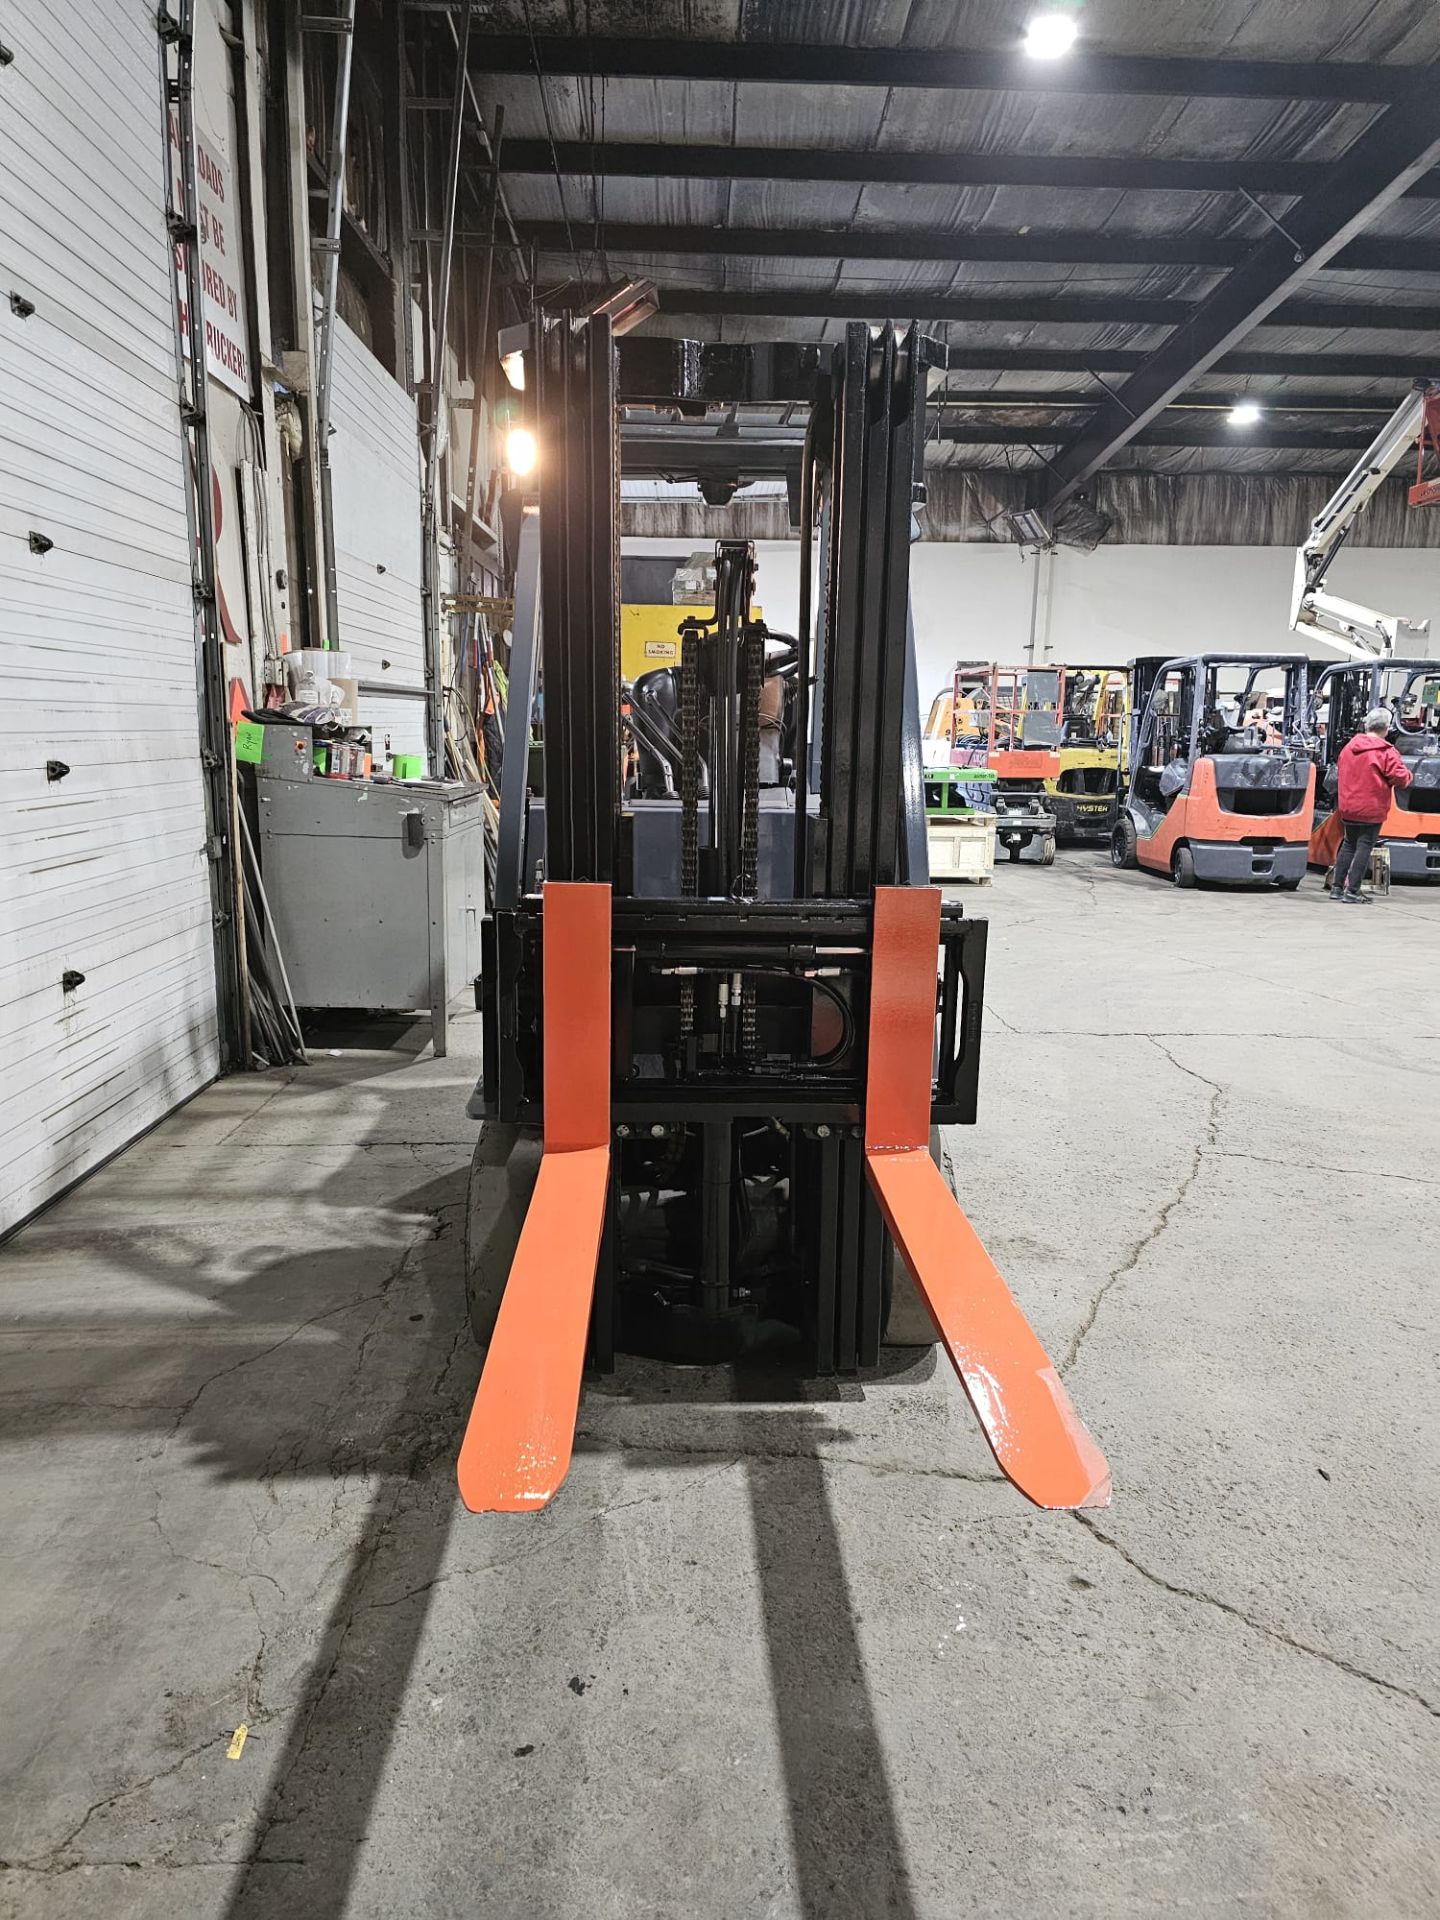 2012 TOYOTA 5,000lbs Capacity Forklift Electric 48V with sideshift with 3-STAGE MAST - FREE CUSTOMS - Image 6 of 6